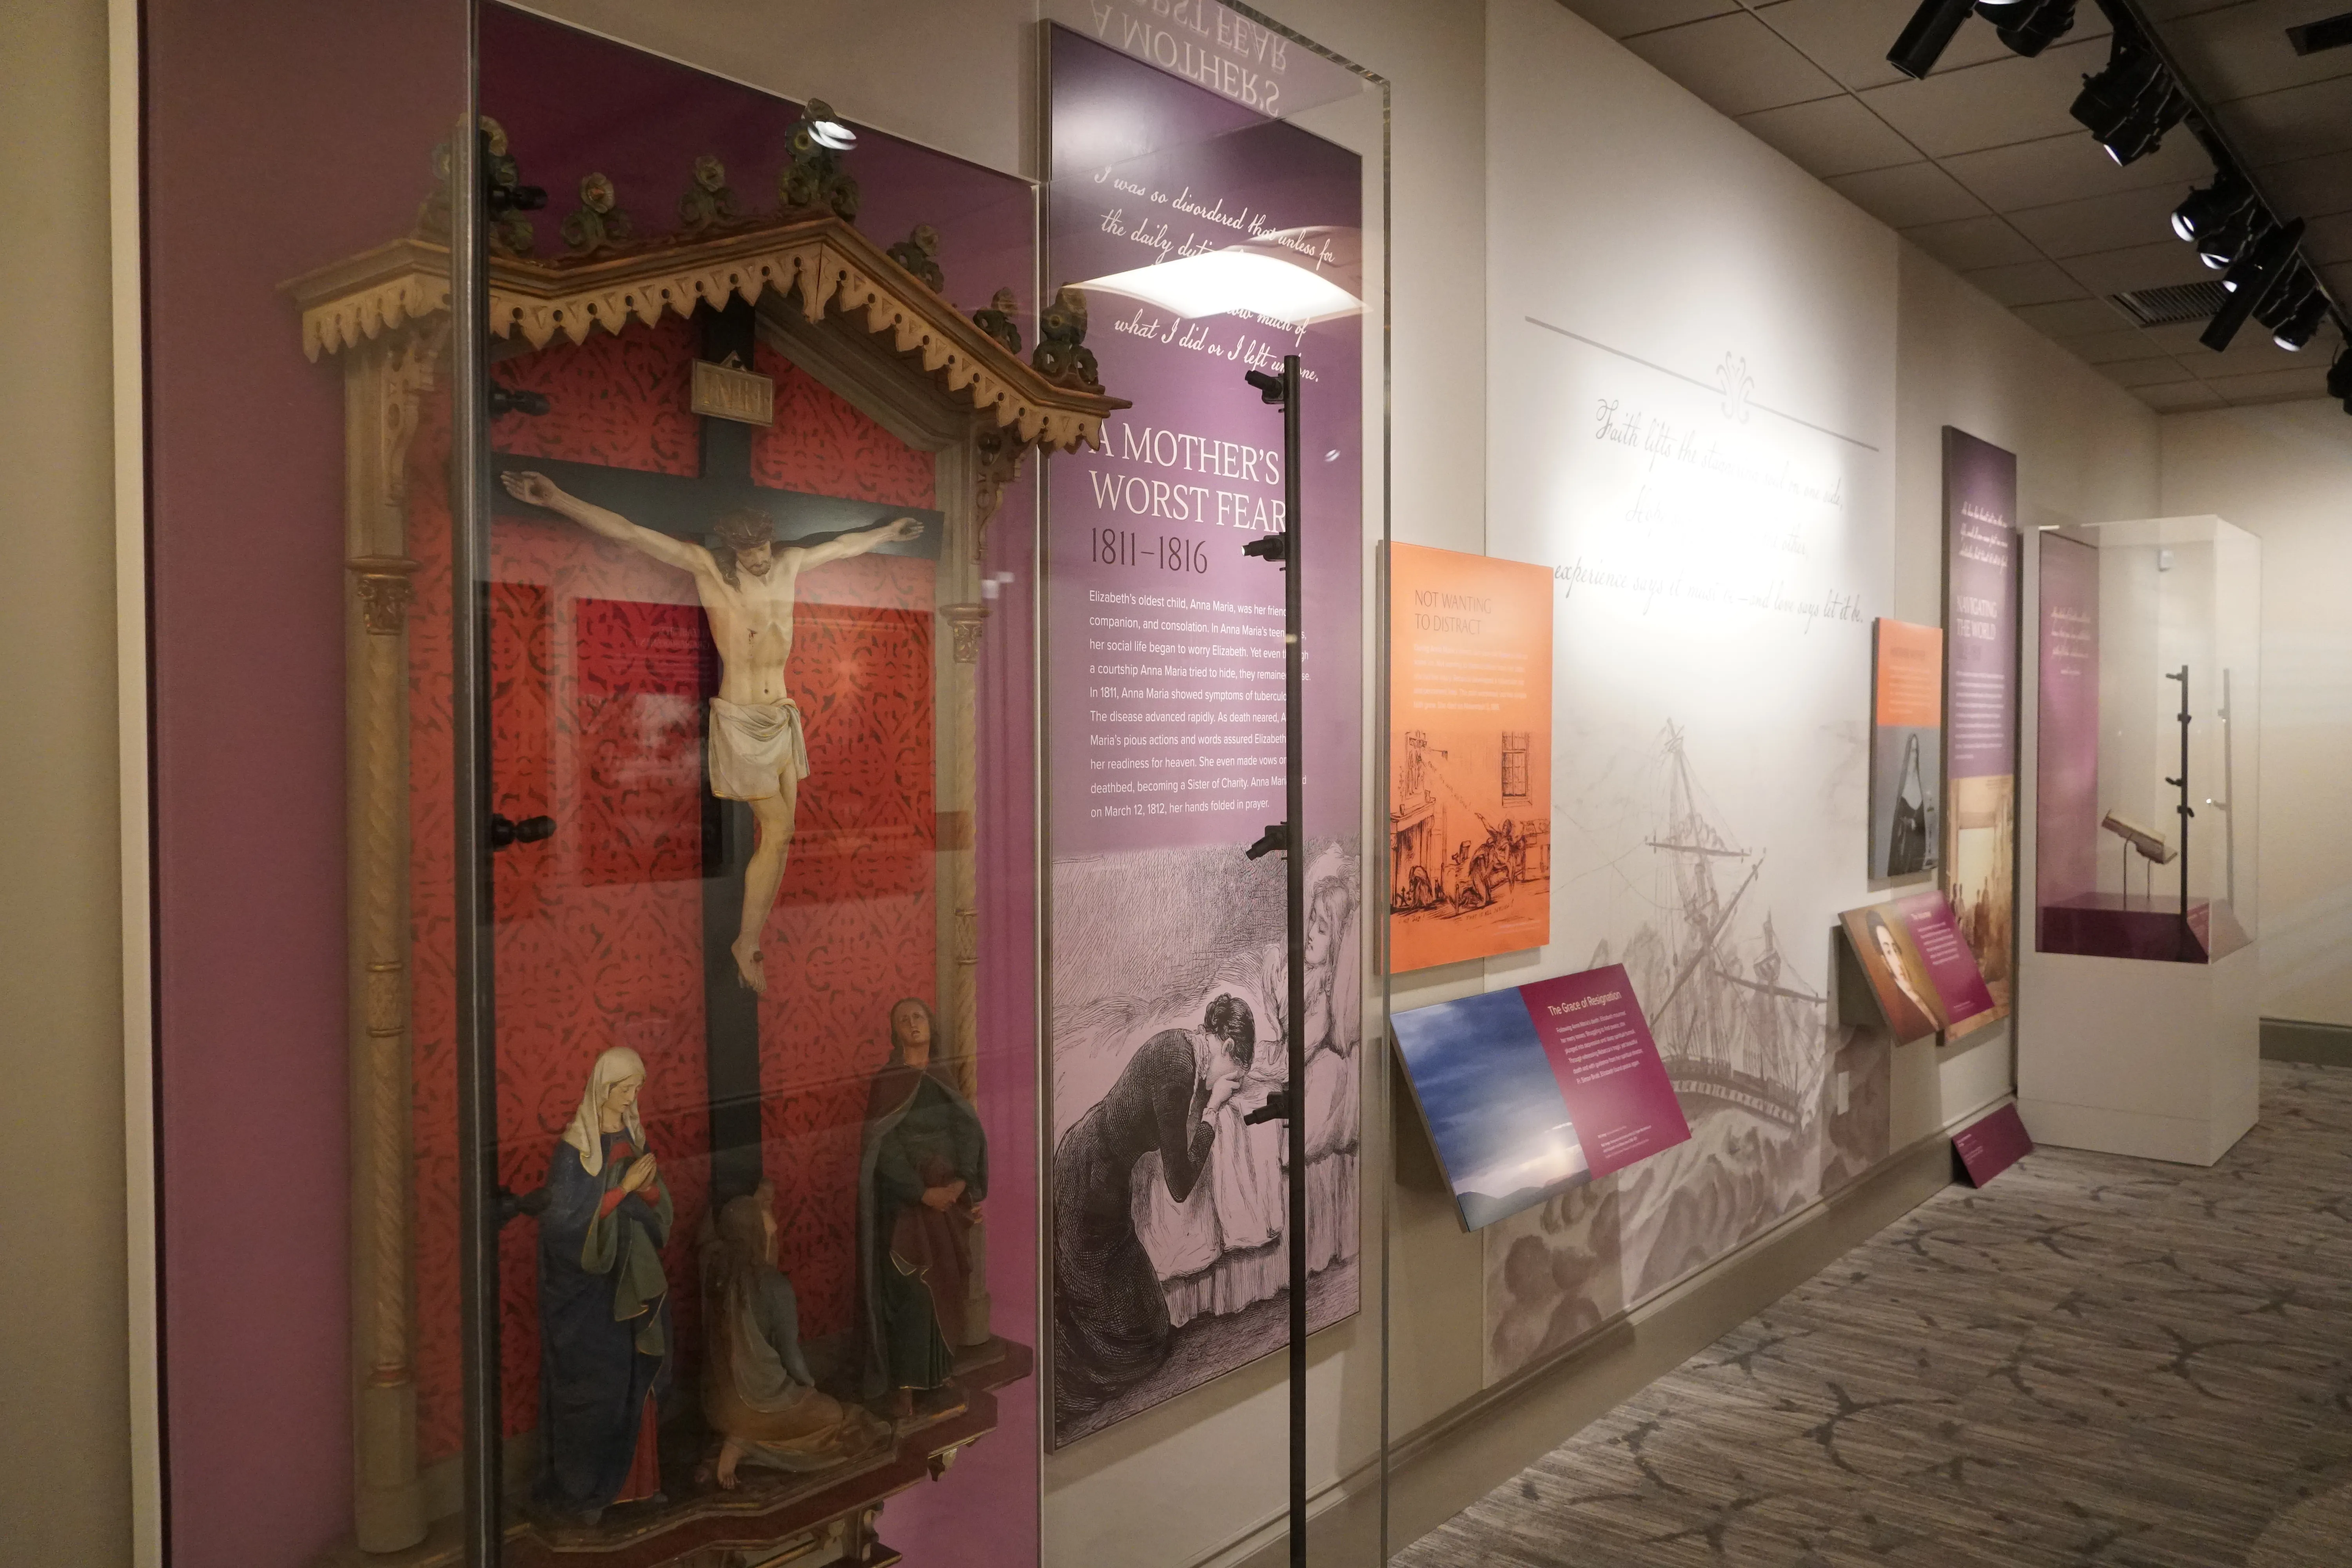  A view of the interior of the Seeker gallery at the new Seton Shrine Museum. Credit: Seton Shrine  